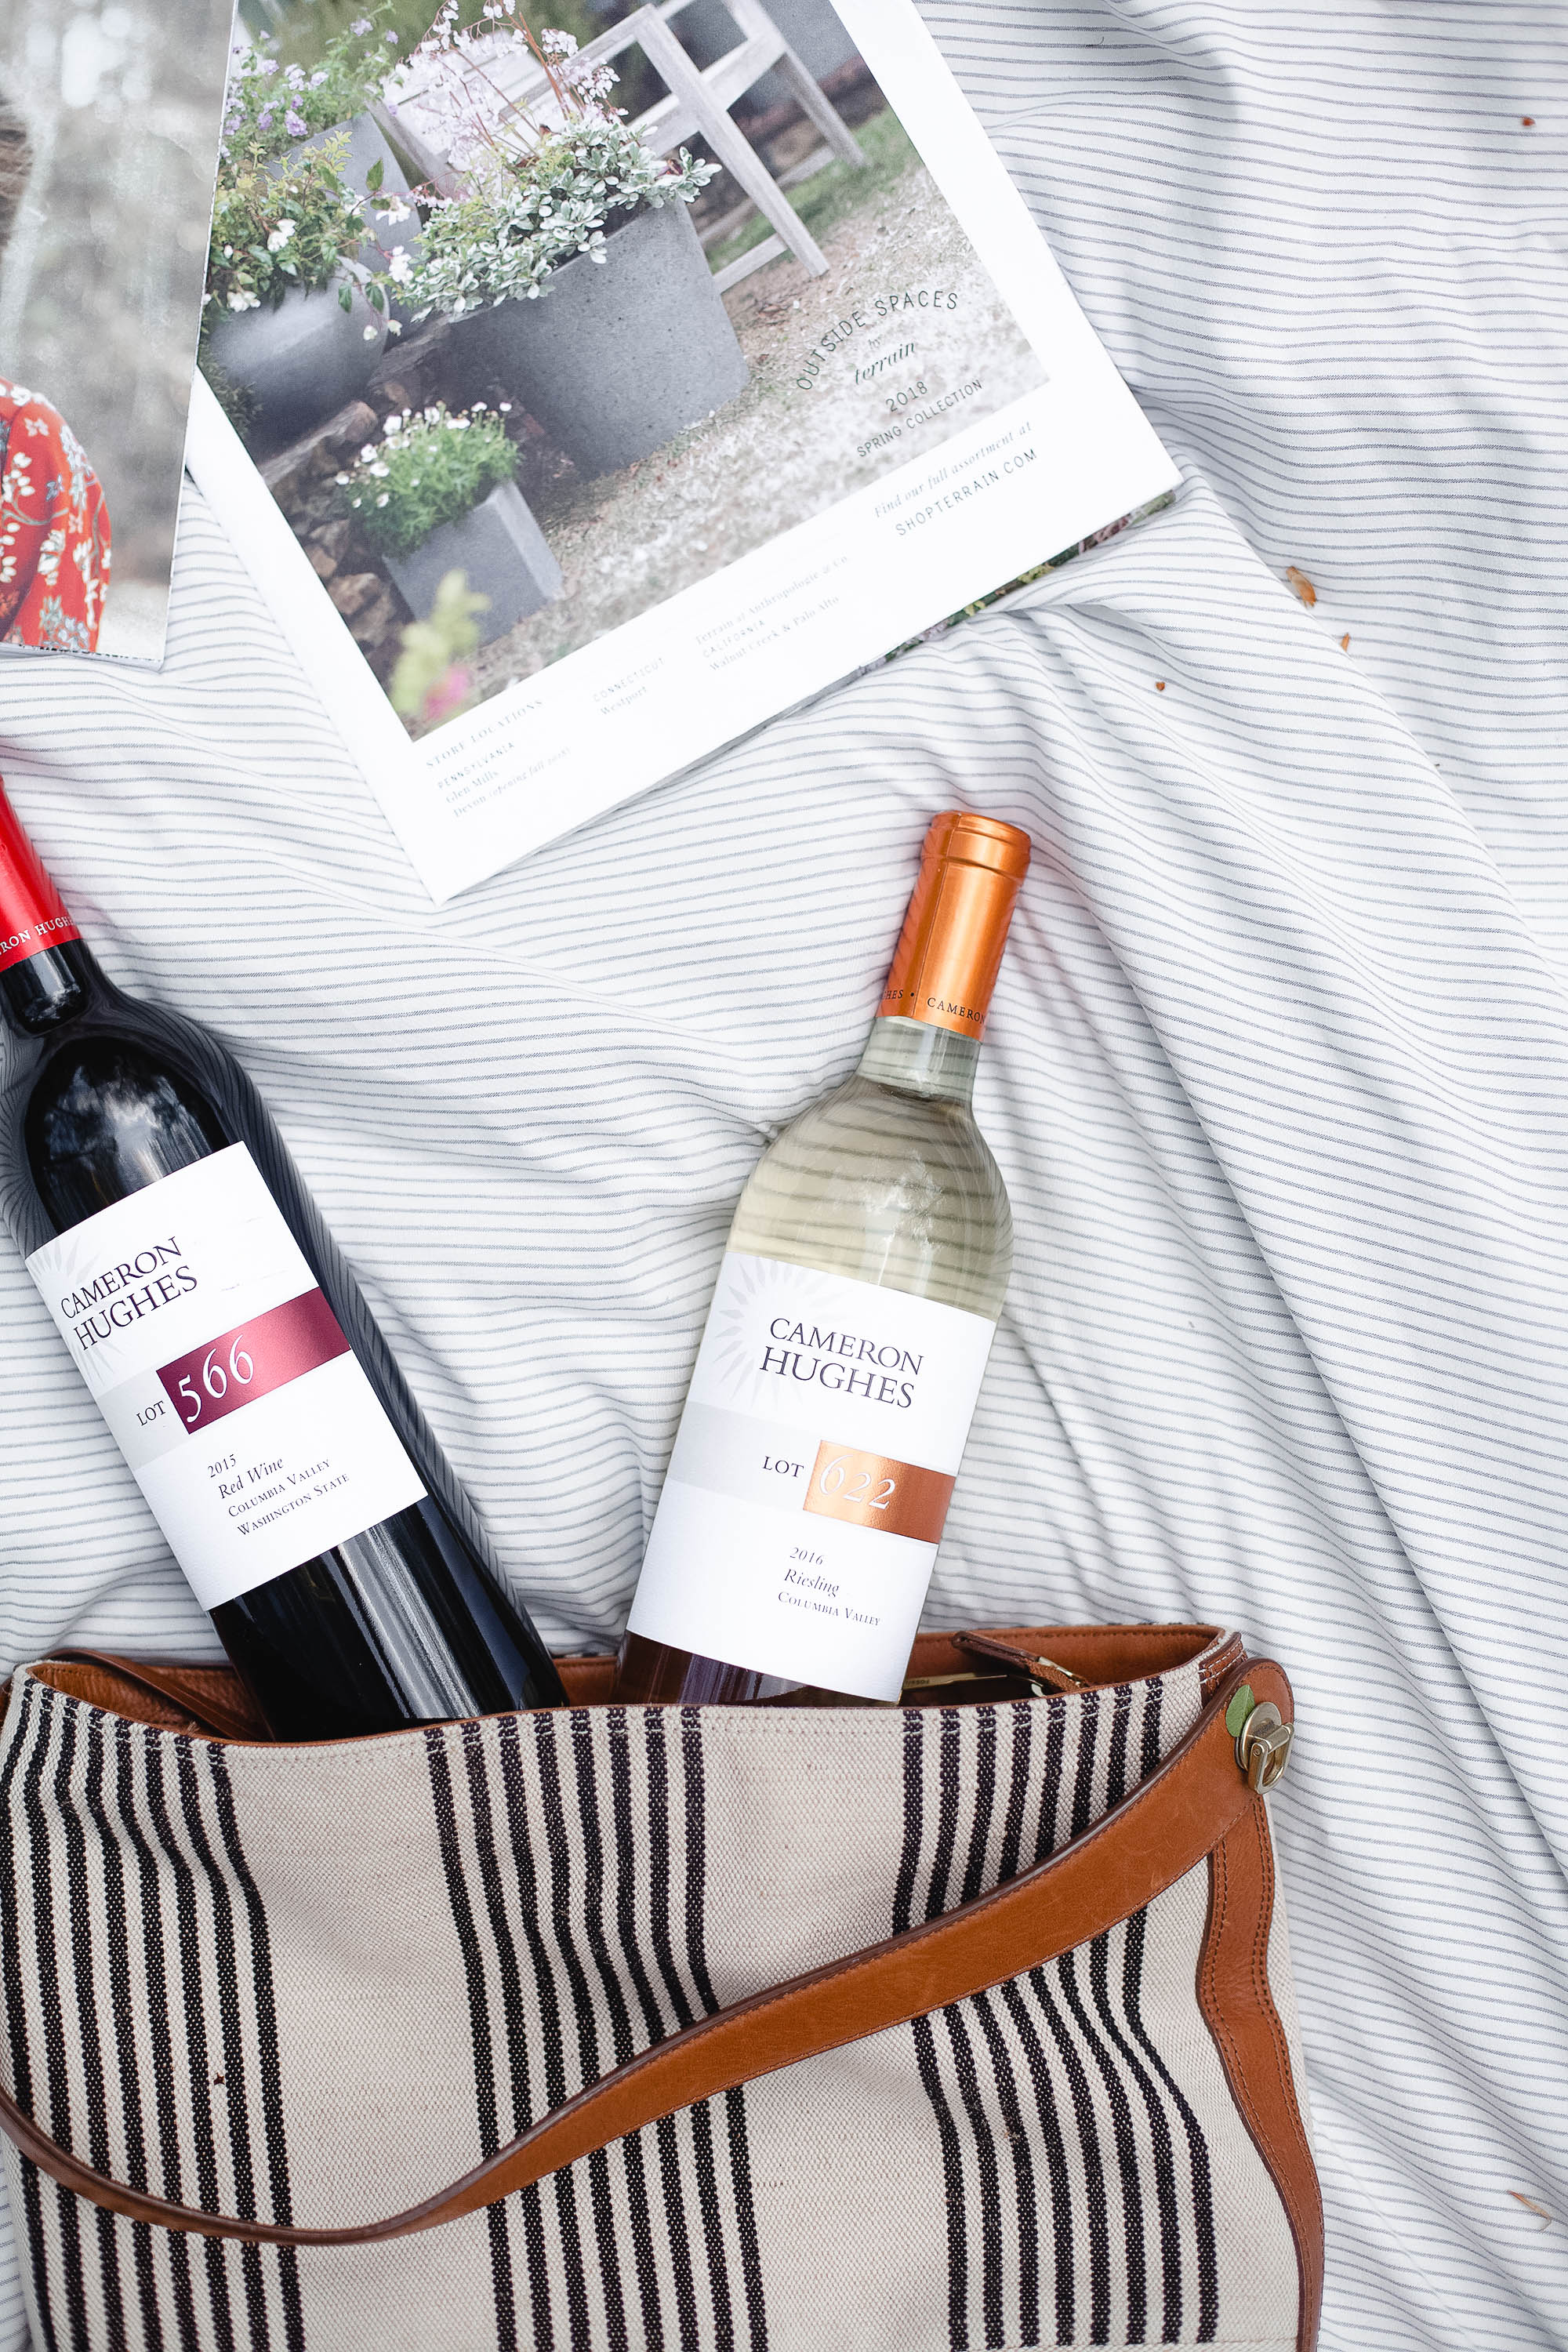 Wine enjoyed with a magazine outdoors on a picnic blanket